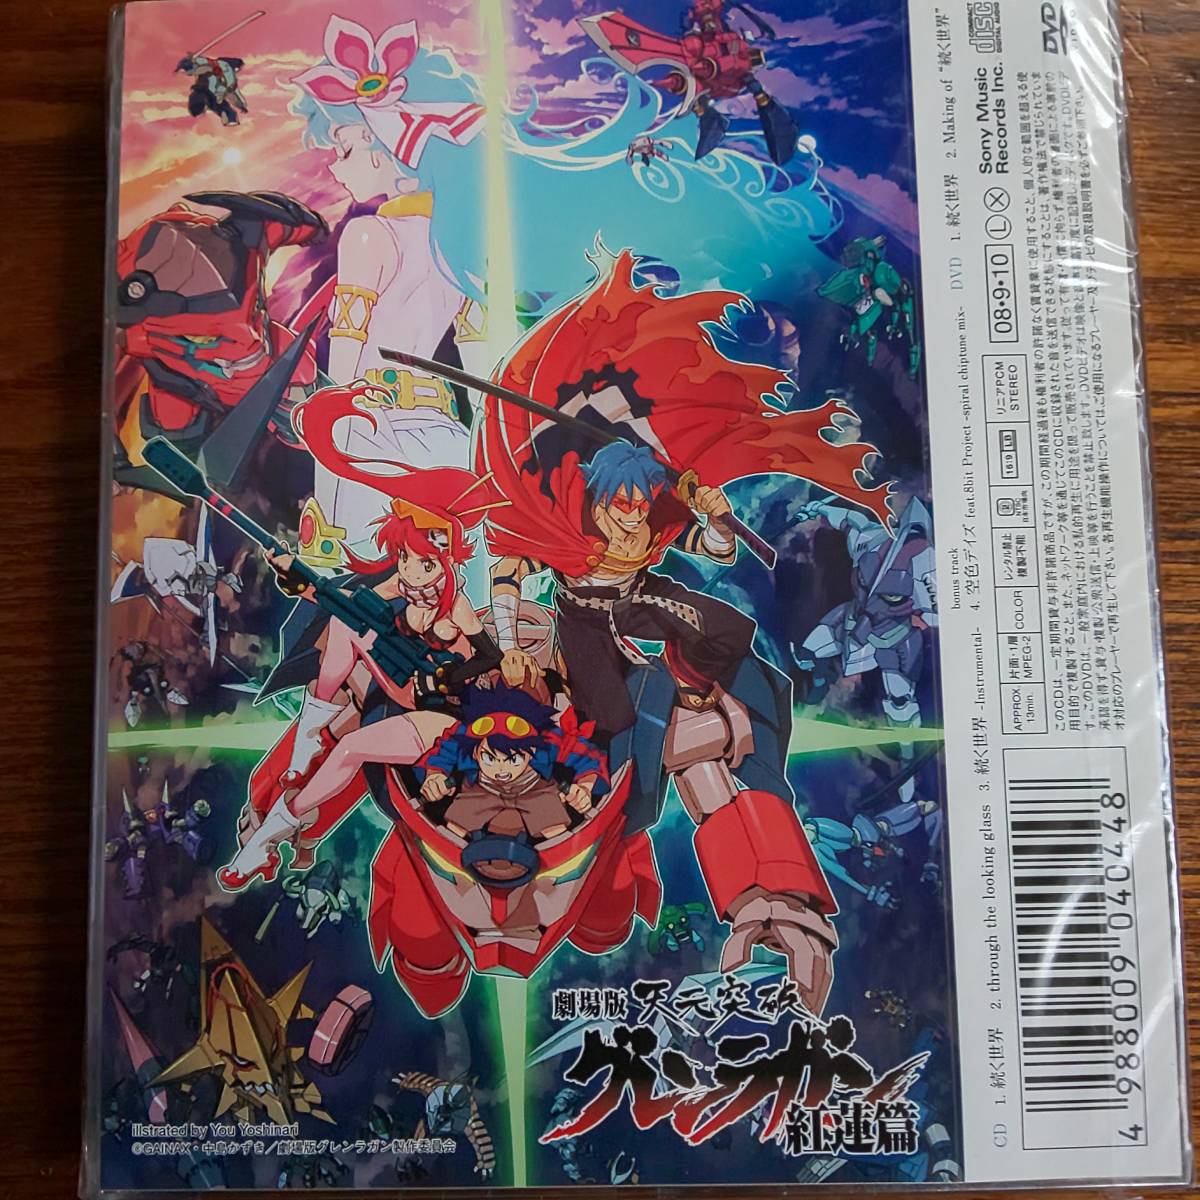  middle river sho ... world theater version Tengen Toppa Gurren-Lagann . lotus . first record SRCL-6843-6844 new goods unopened postage included 